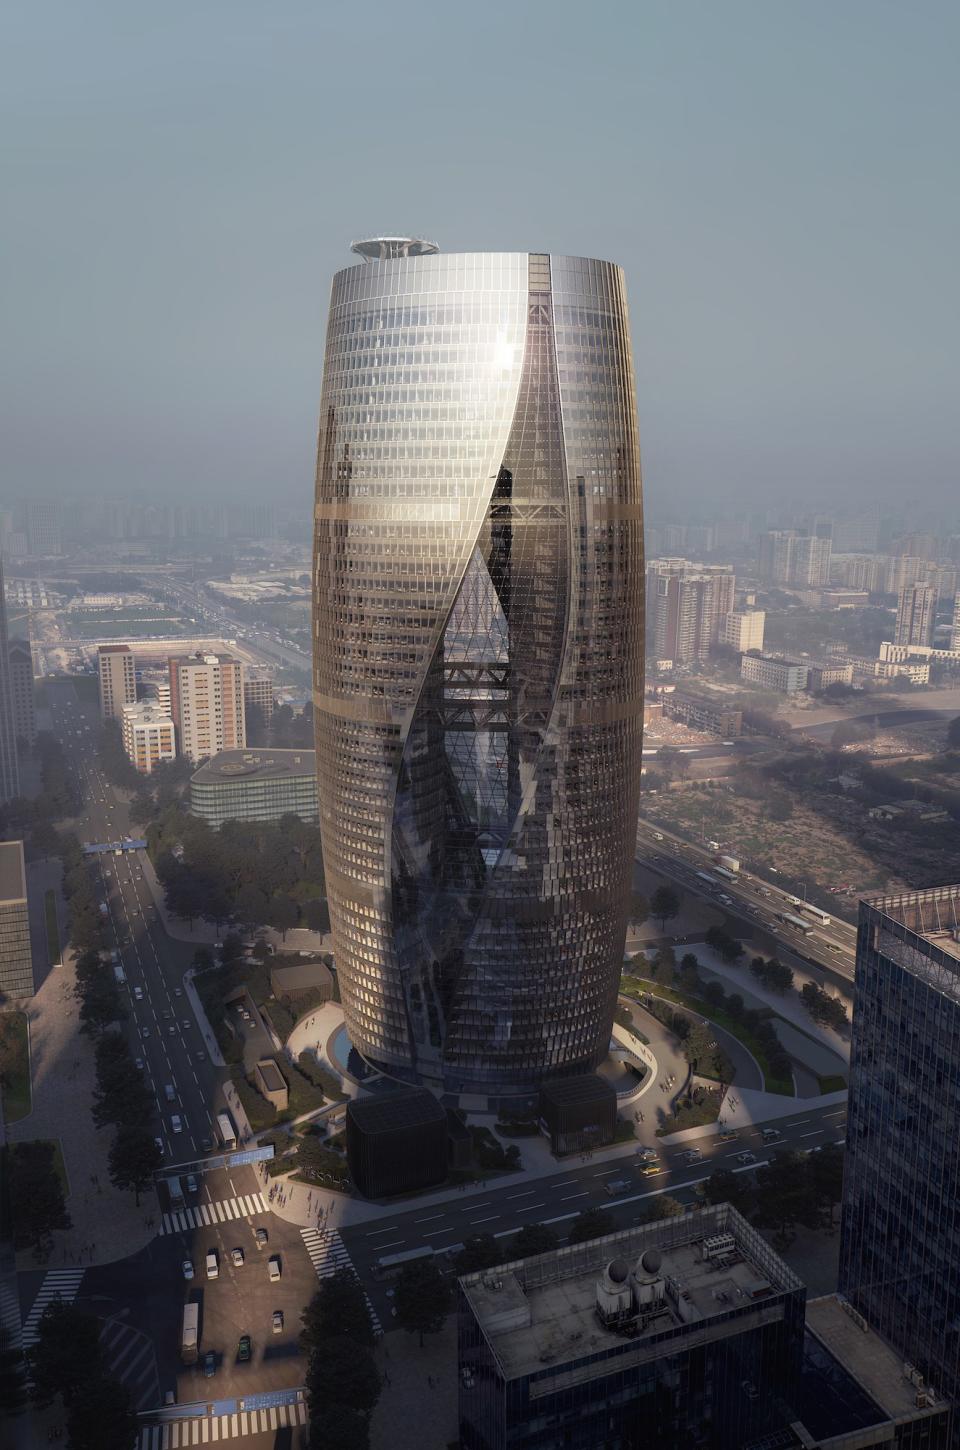 Scheduled for completion in 2018, Beijing's Leeza Soho Tower was one of the last designs Zaha Hadid touched before her untimely death